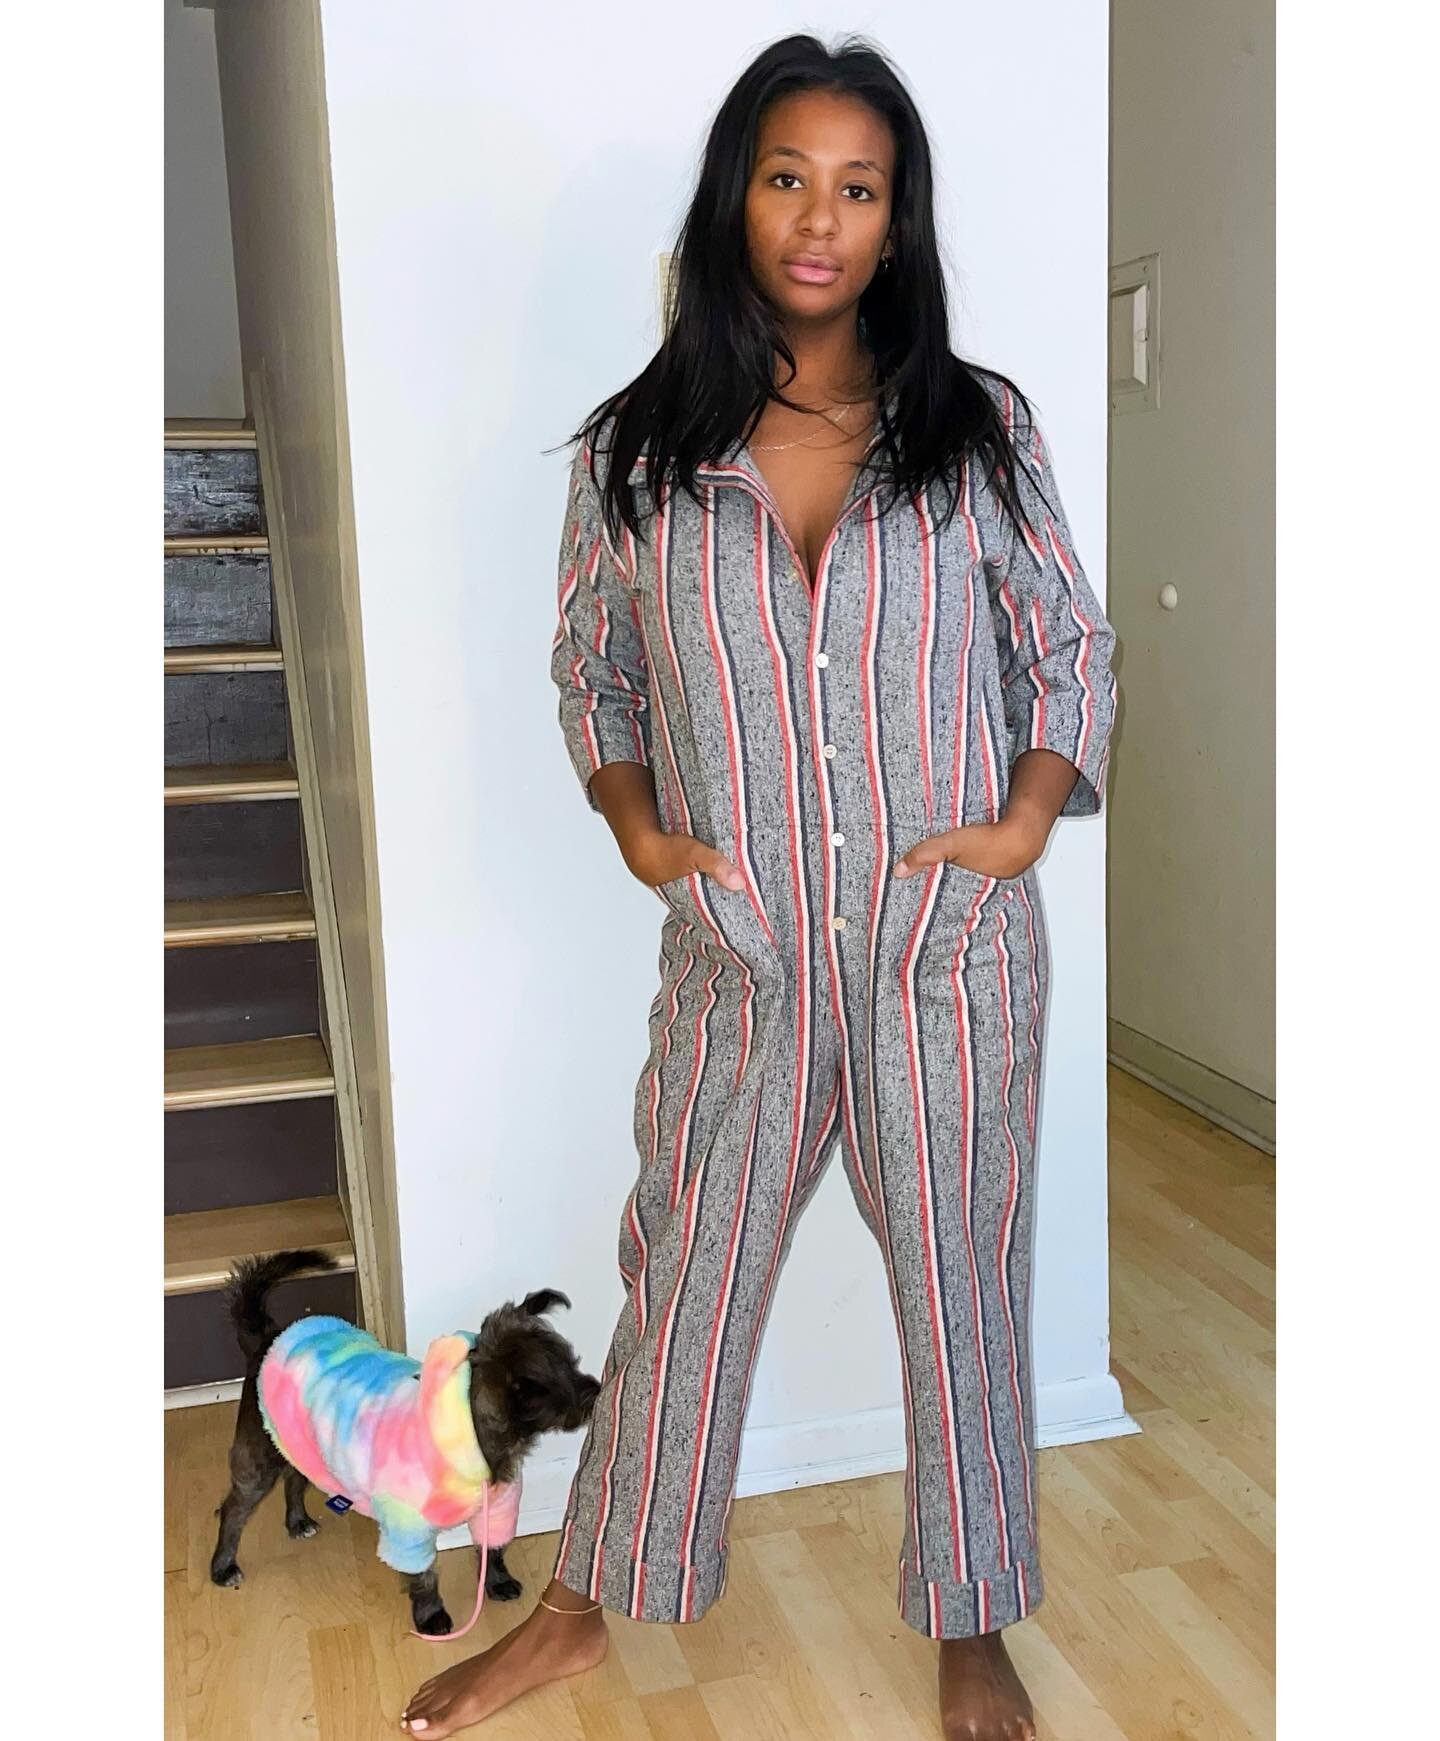 So I have been MIA here for a while. 2020 was a lot to process. Working from home &amp; not being able to get dressed and going out really started to bum me out. Completely sick of sweatpants, I designed these versatile, soft multifunctional jumpsuit